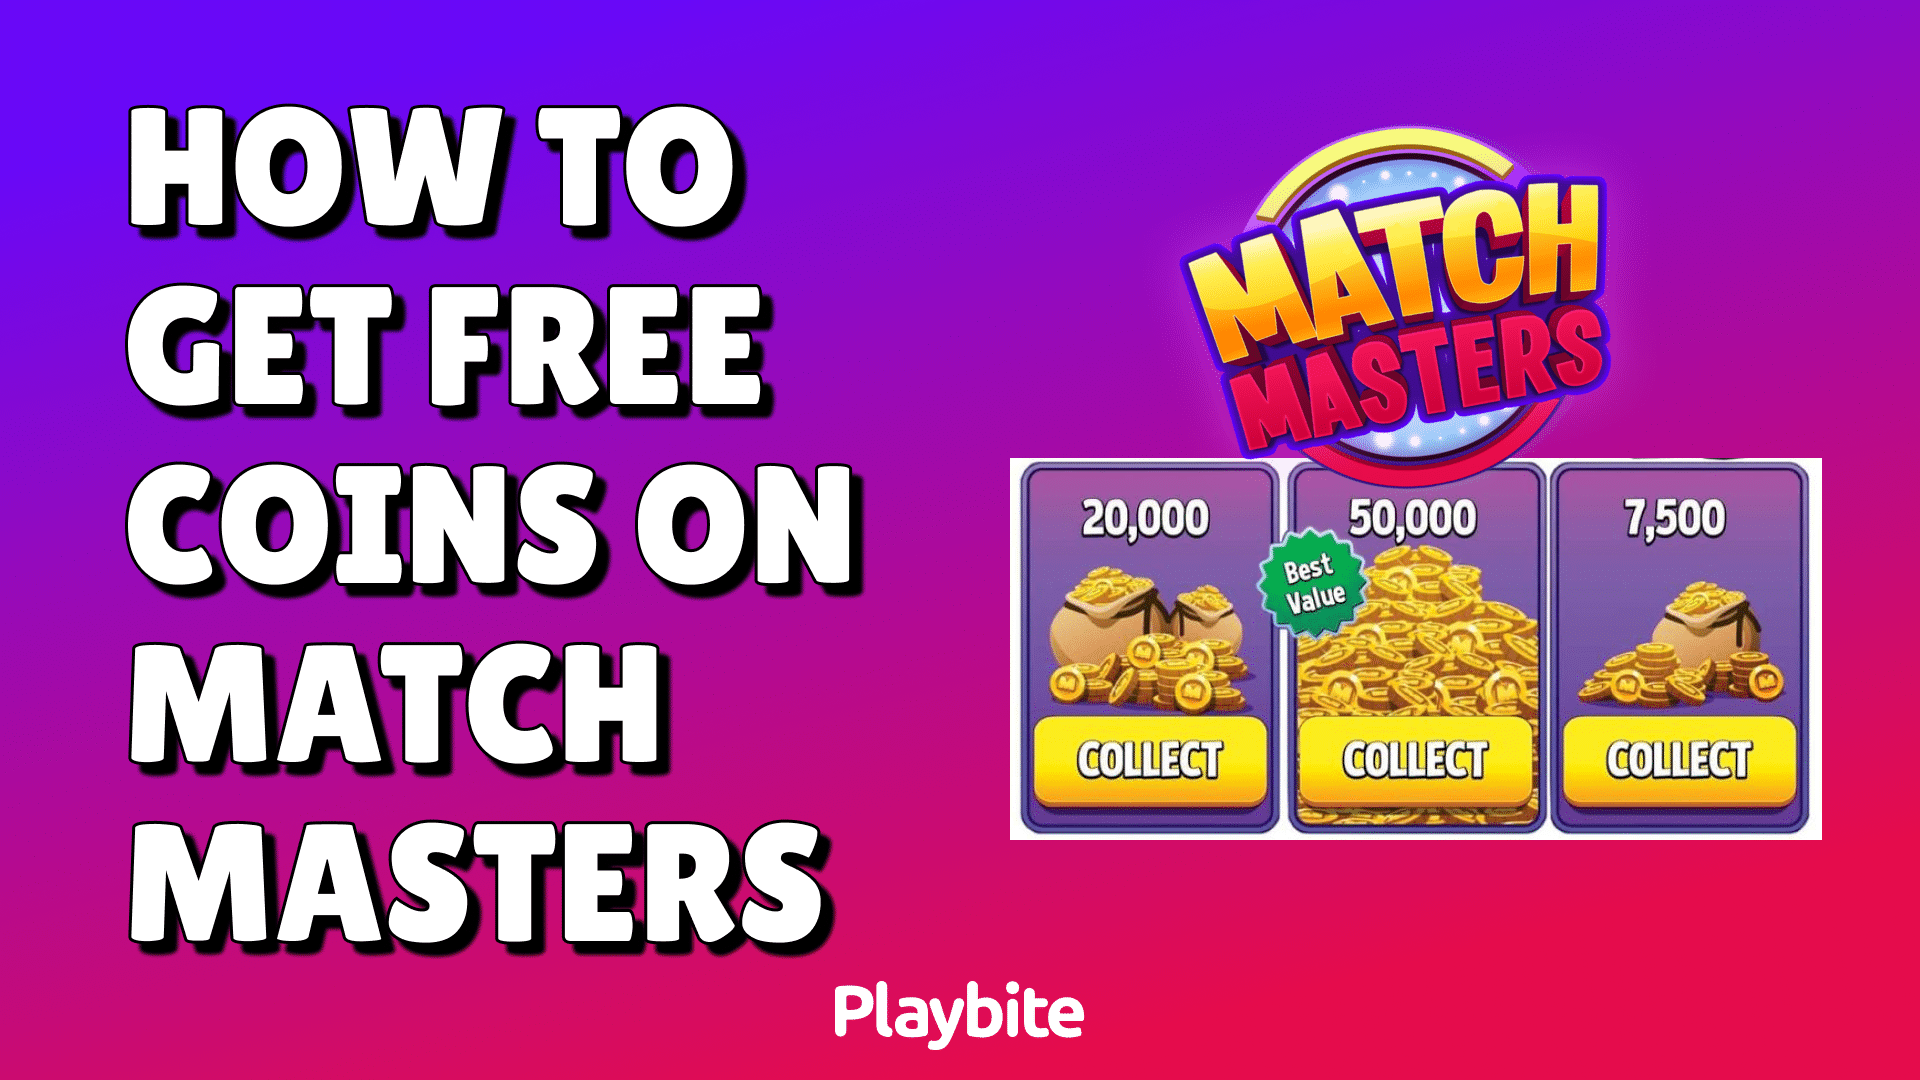 How To Get Free Coins On Match Masters